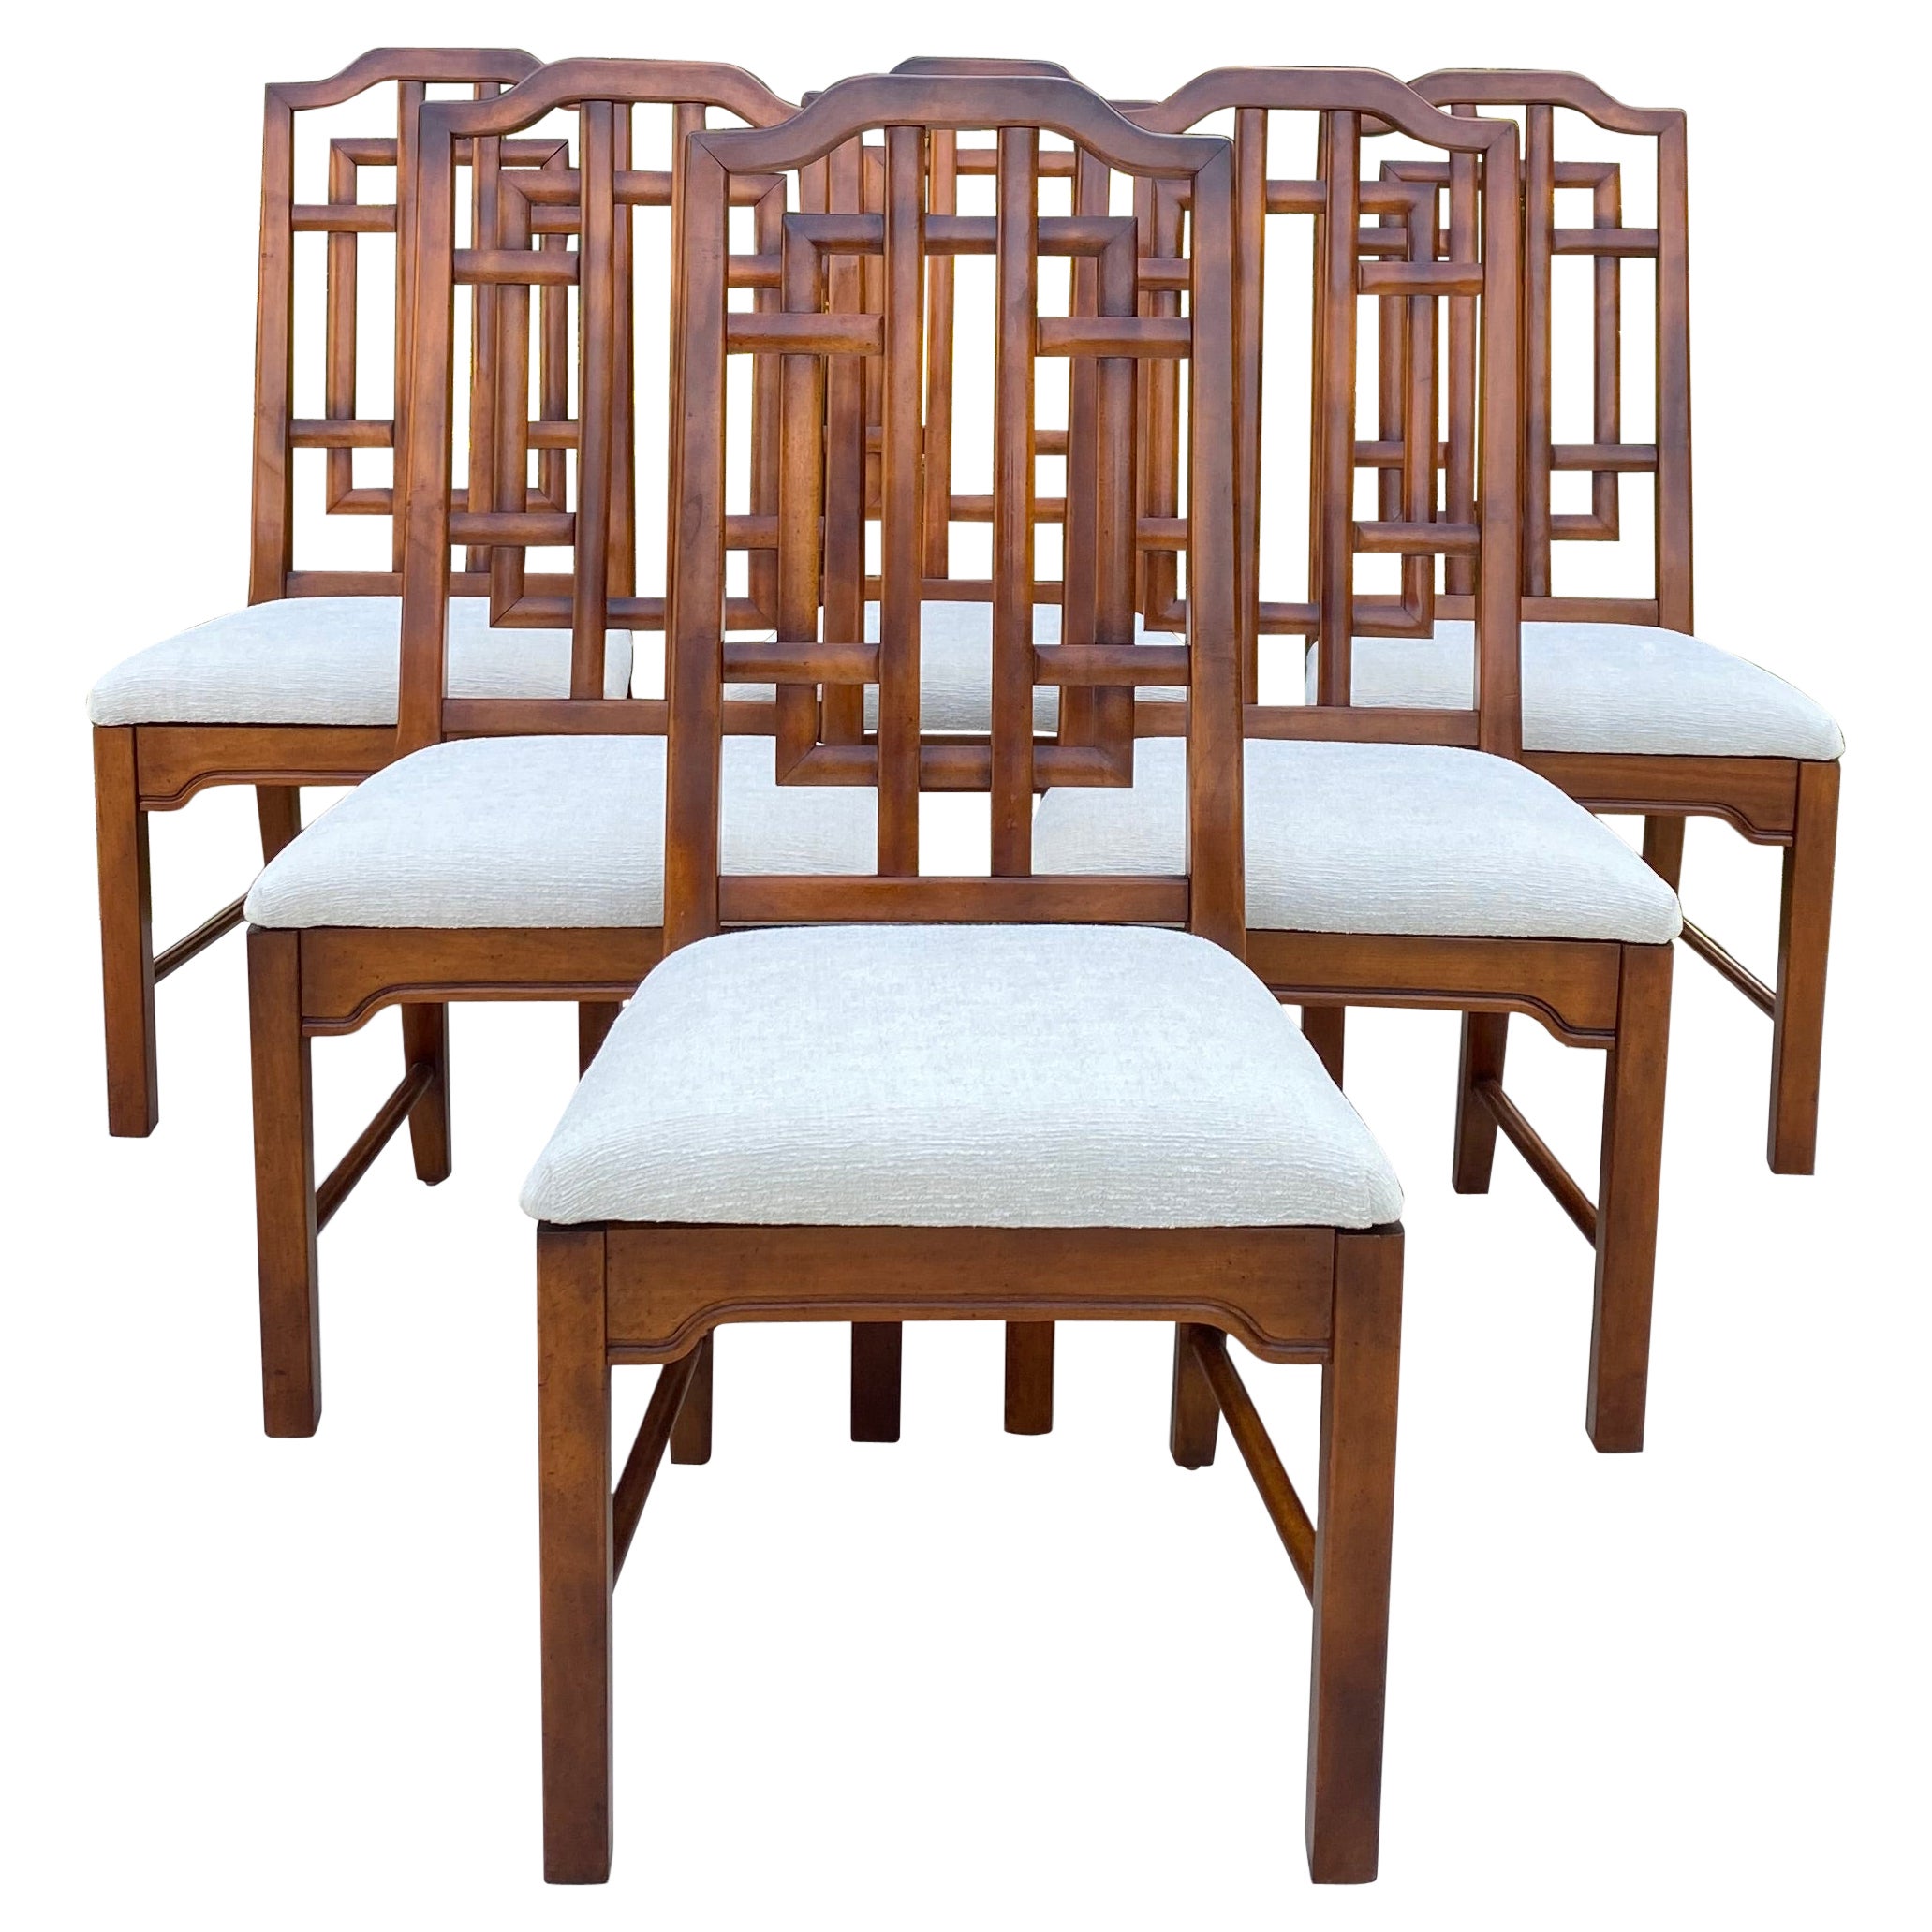 Reupholstered "Dixie" Asian inspired Dining Chairs, Set of 6